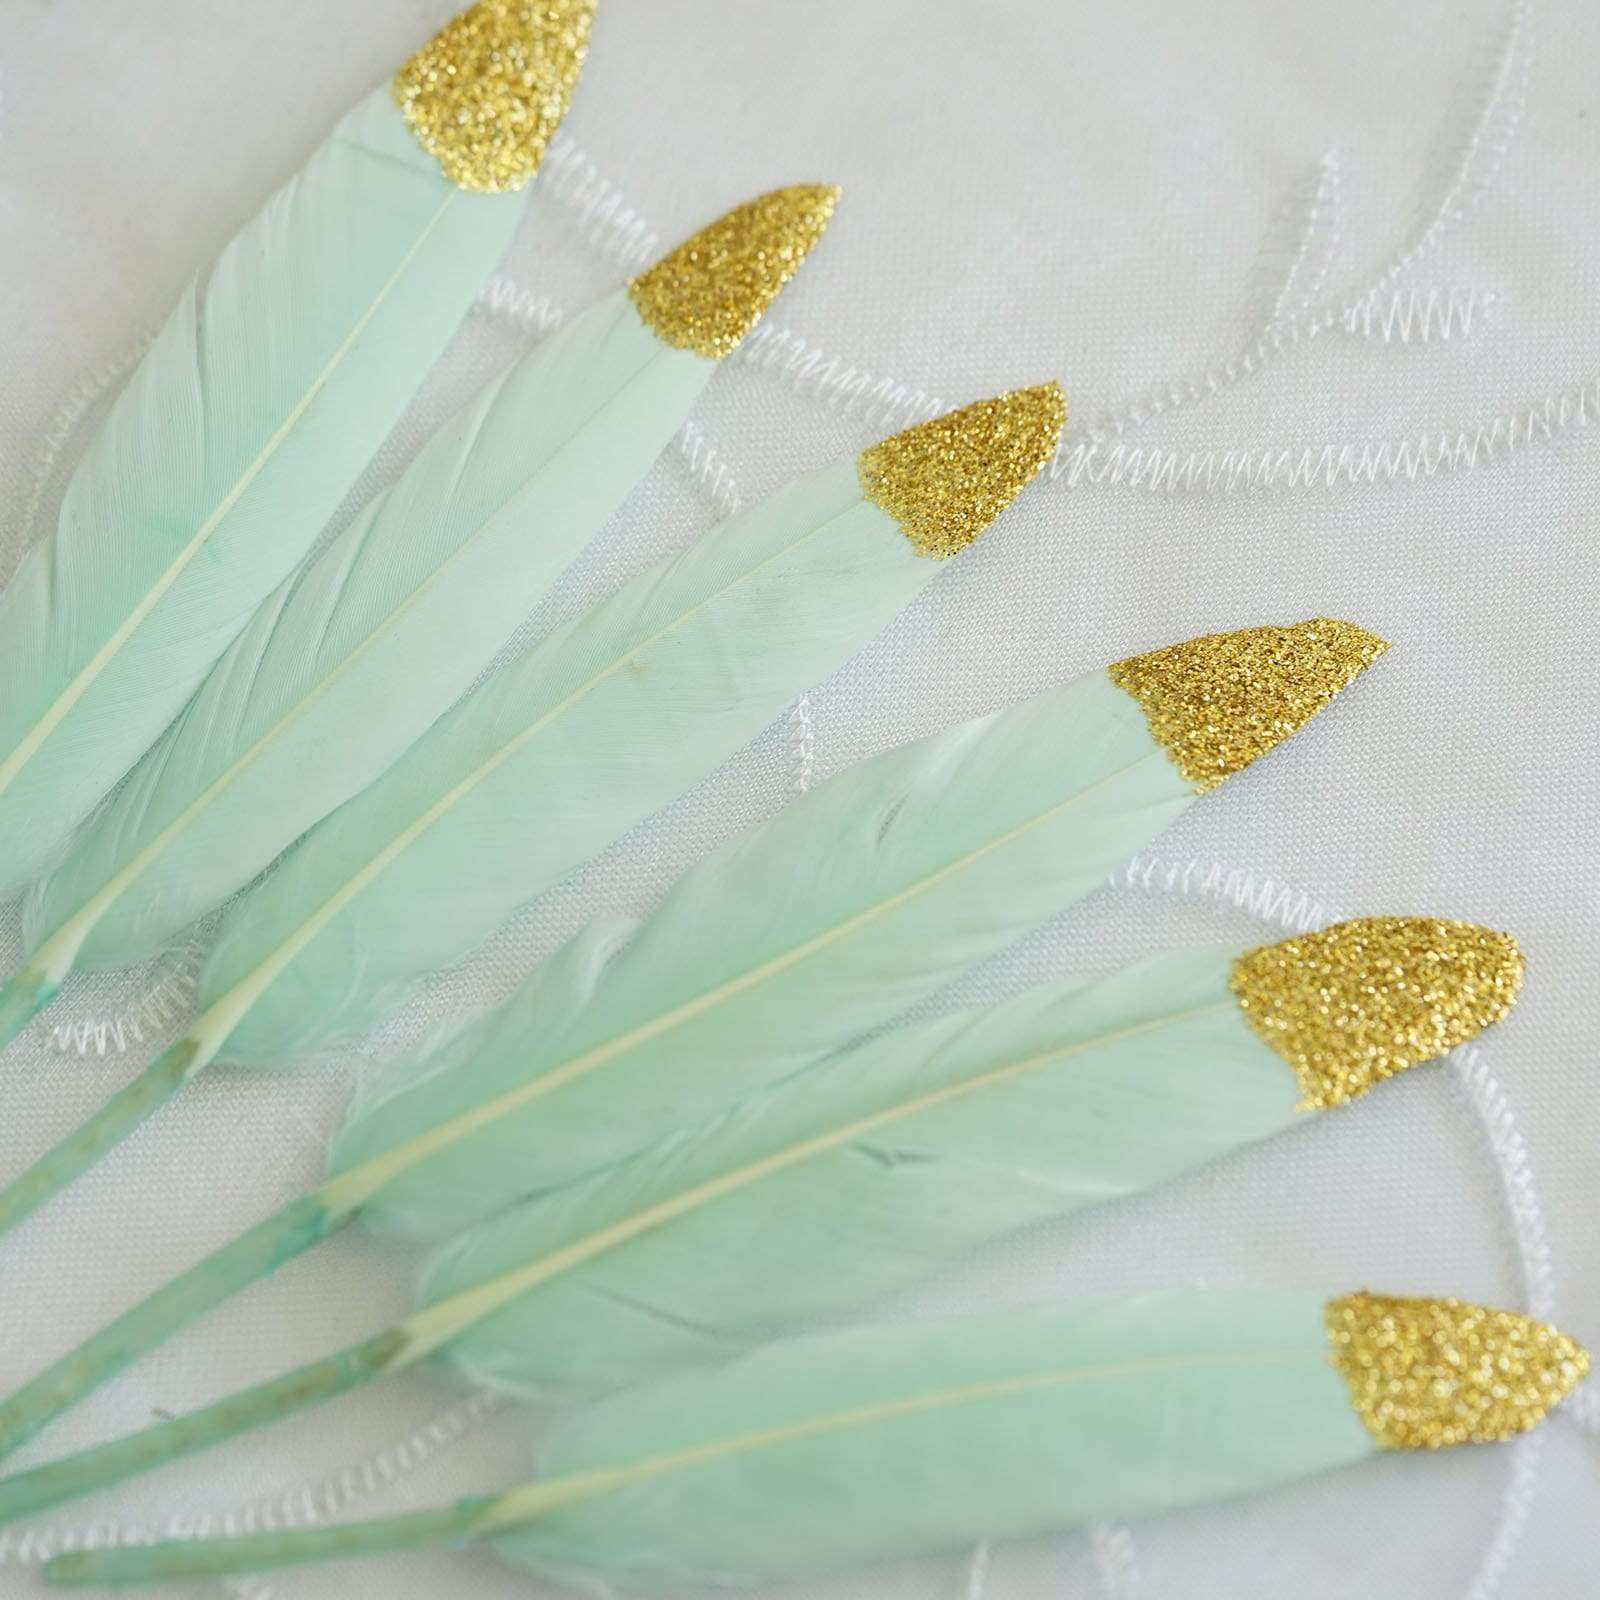 30 Tip Natural Decorative Turkey Feathers